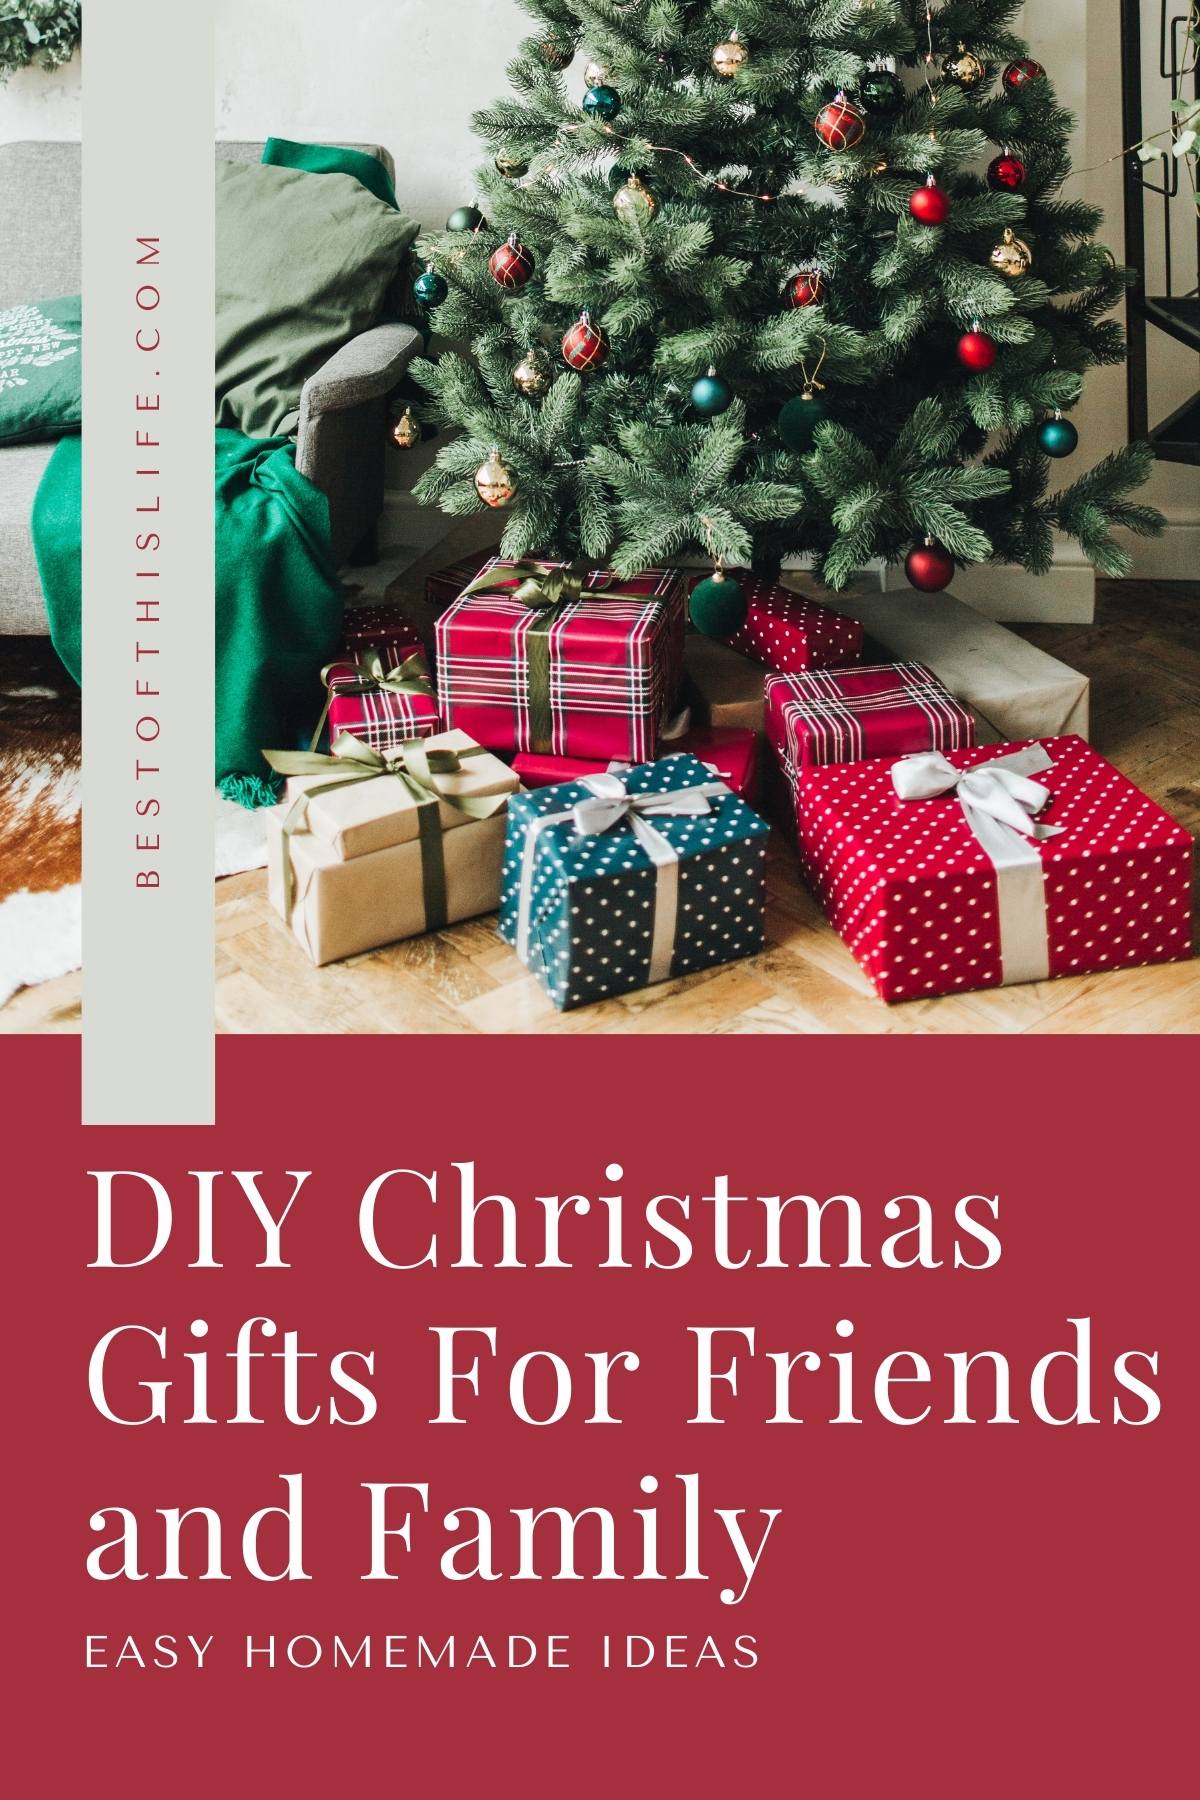 Amazon.com: Best Friend Gift Friends TV Show Gifts Ill Be There For You Gift  for Friend Birthday Gift Holiday Gift Christmas Gift : Home & Kitchen